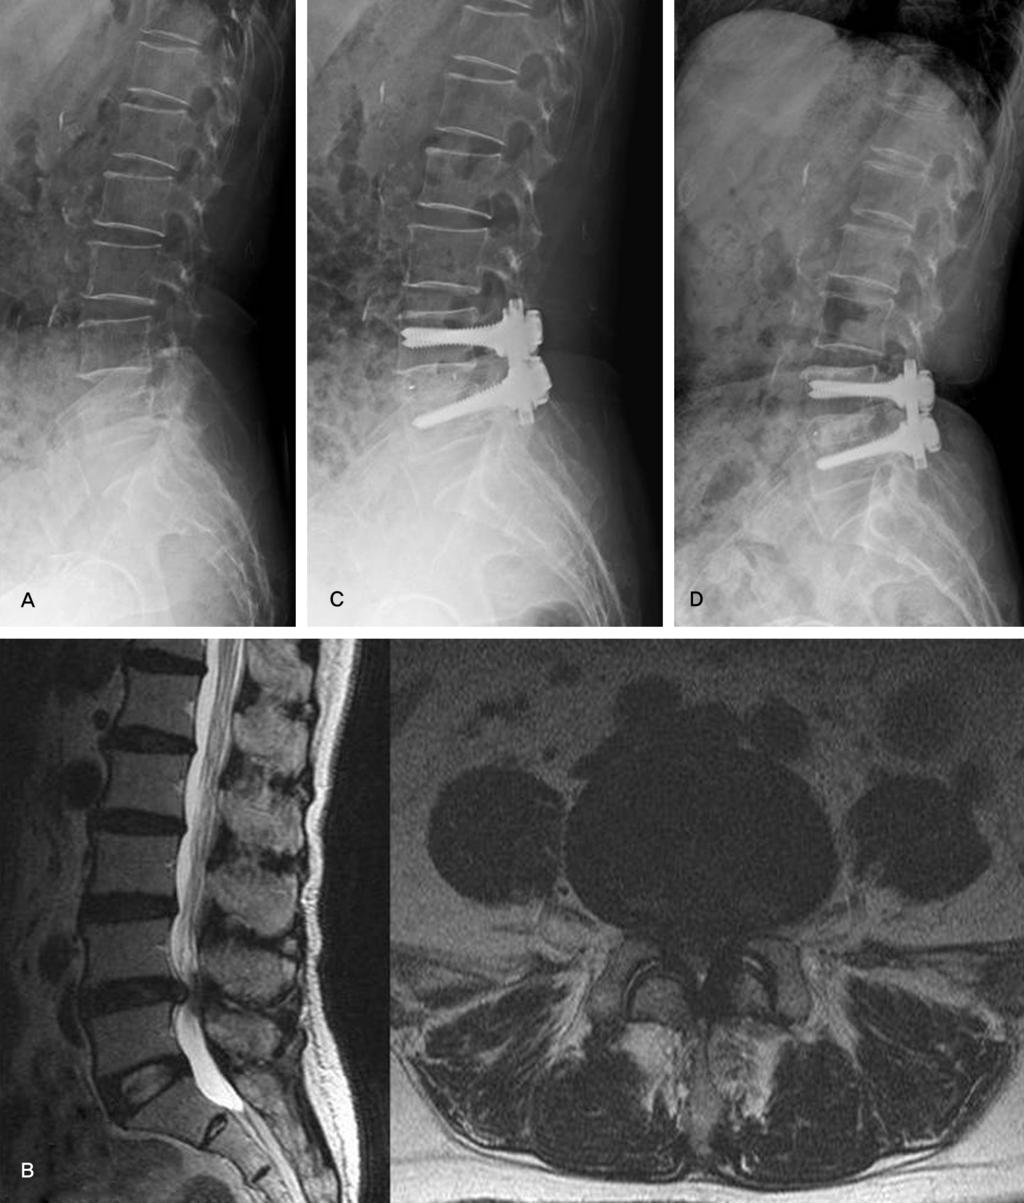 Kyung-Jin Song et al Volume 18 Number 4 December 2011 Fig. 1. A 69-year-old female presented with back pain, sciatica and neurogenic claudication.